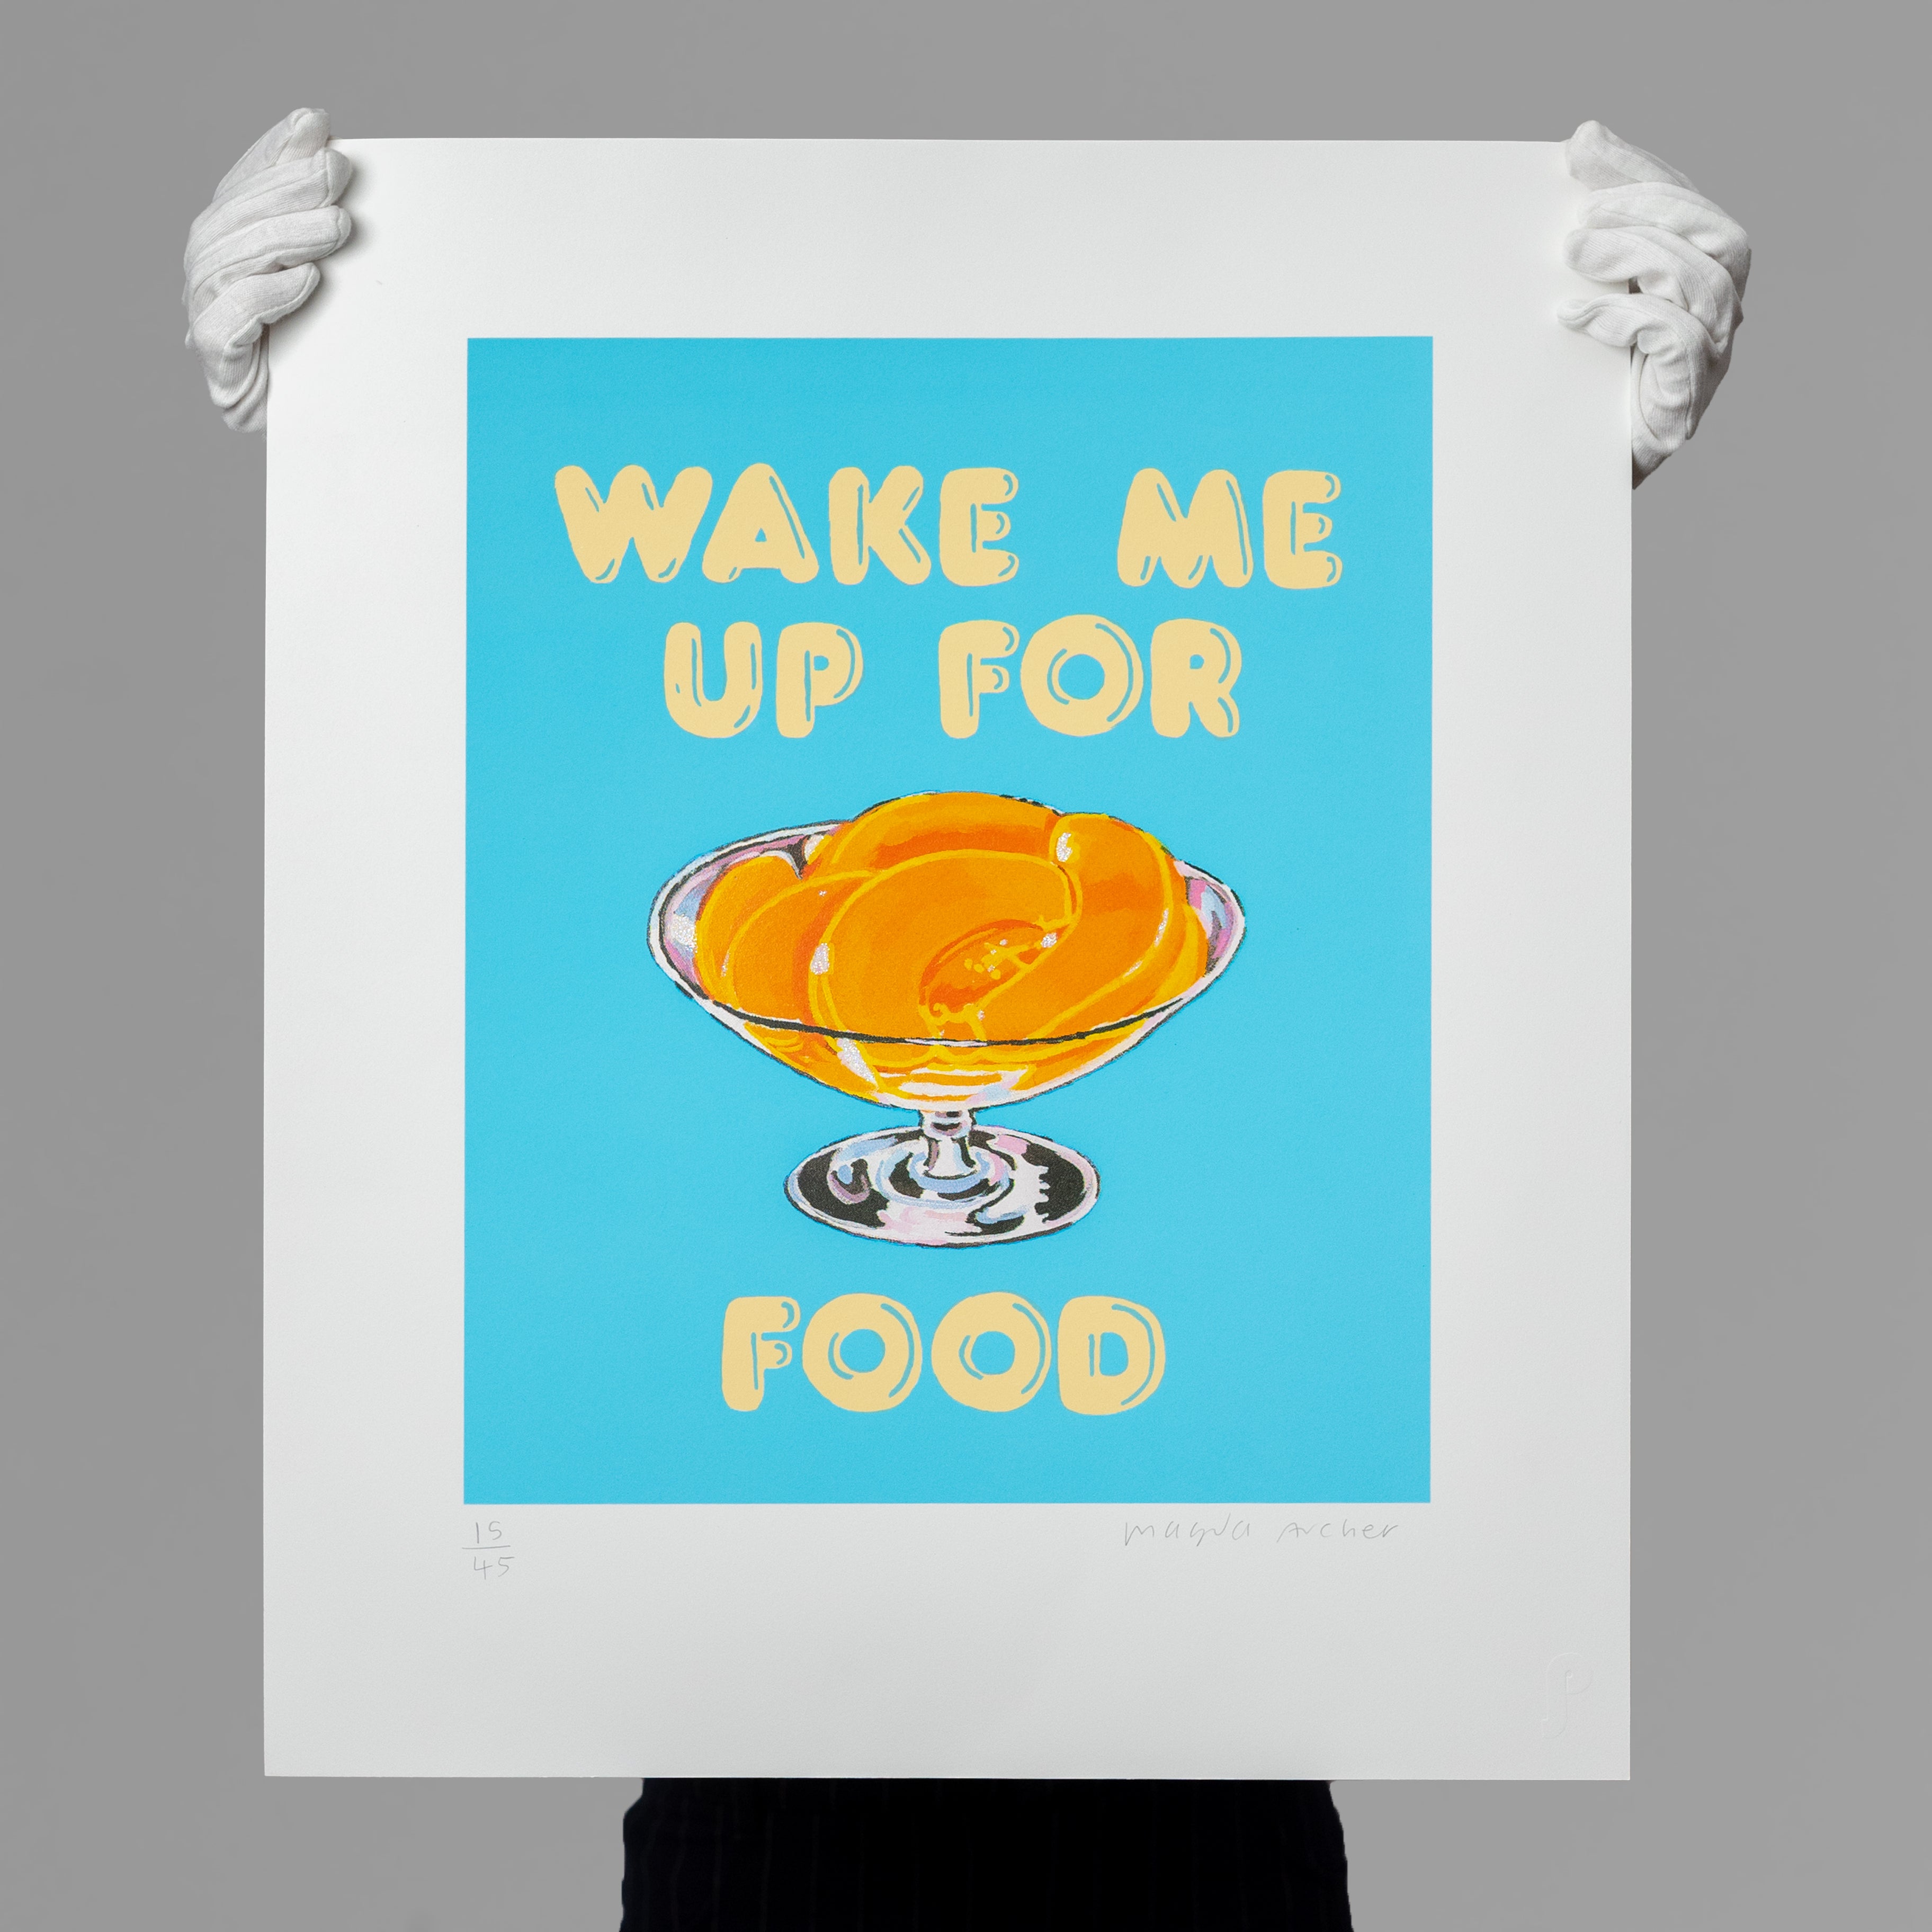 Magda Archer - Wake me up for Food